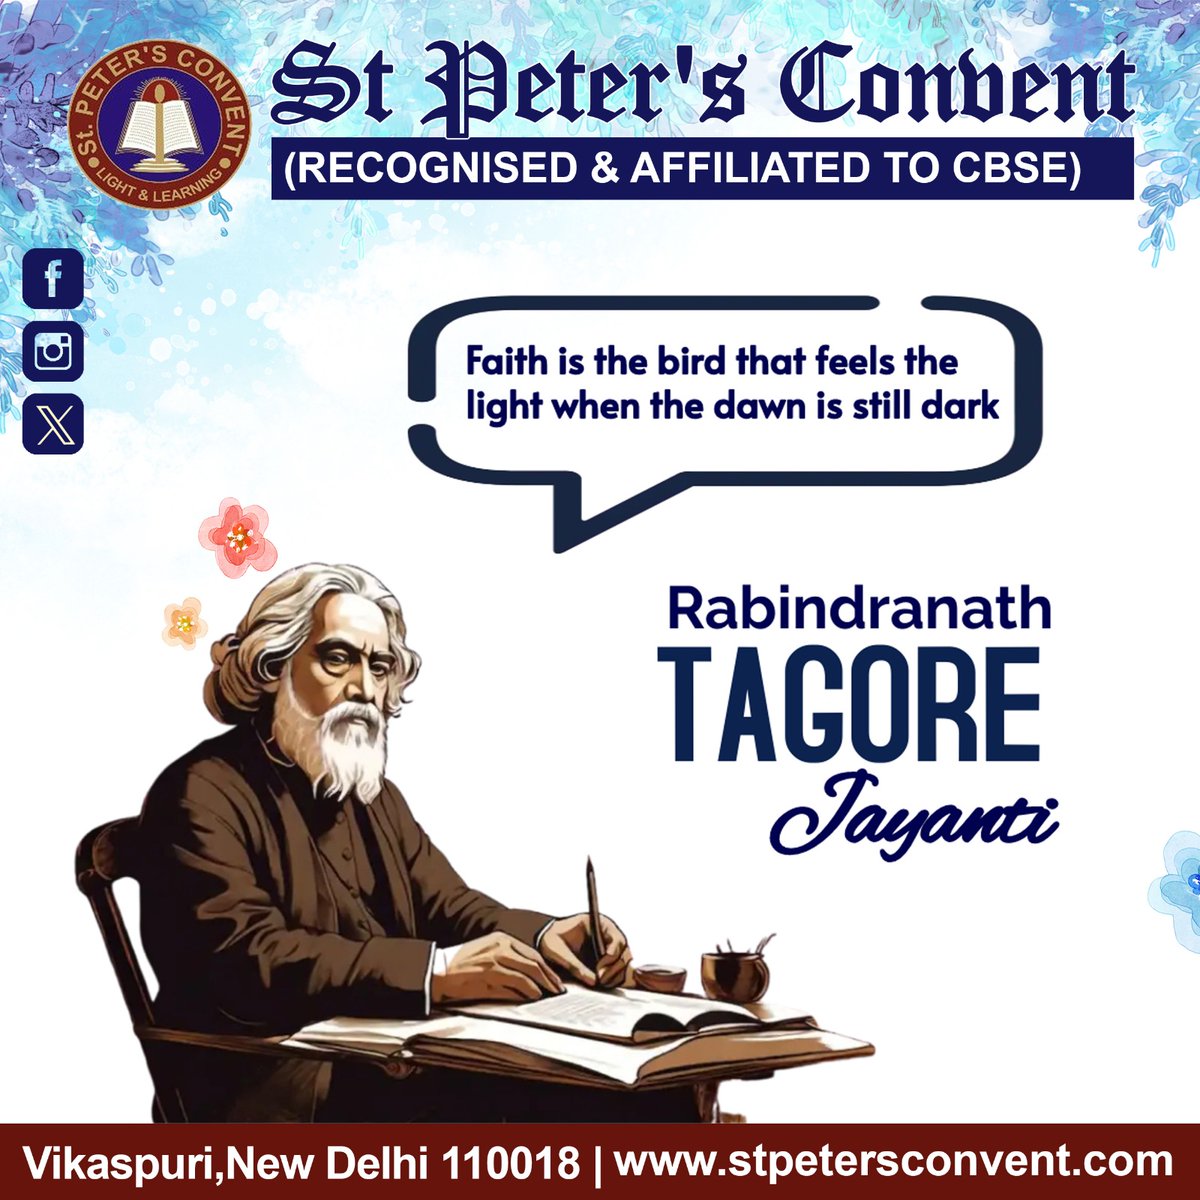 On this Rabindranath Tagore Jayanti, let us honor the memory of the visionary poet and philosopher whose words continue to resonate with the essence of India's cultural heritage.

#SPC #RabindranathTagore #RabindranathTagoreJayanti #remberance #poet #philosopher #artist